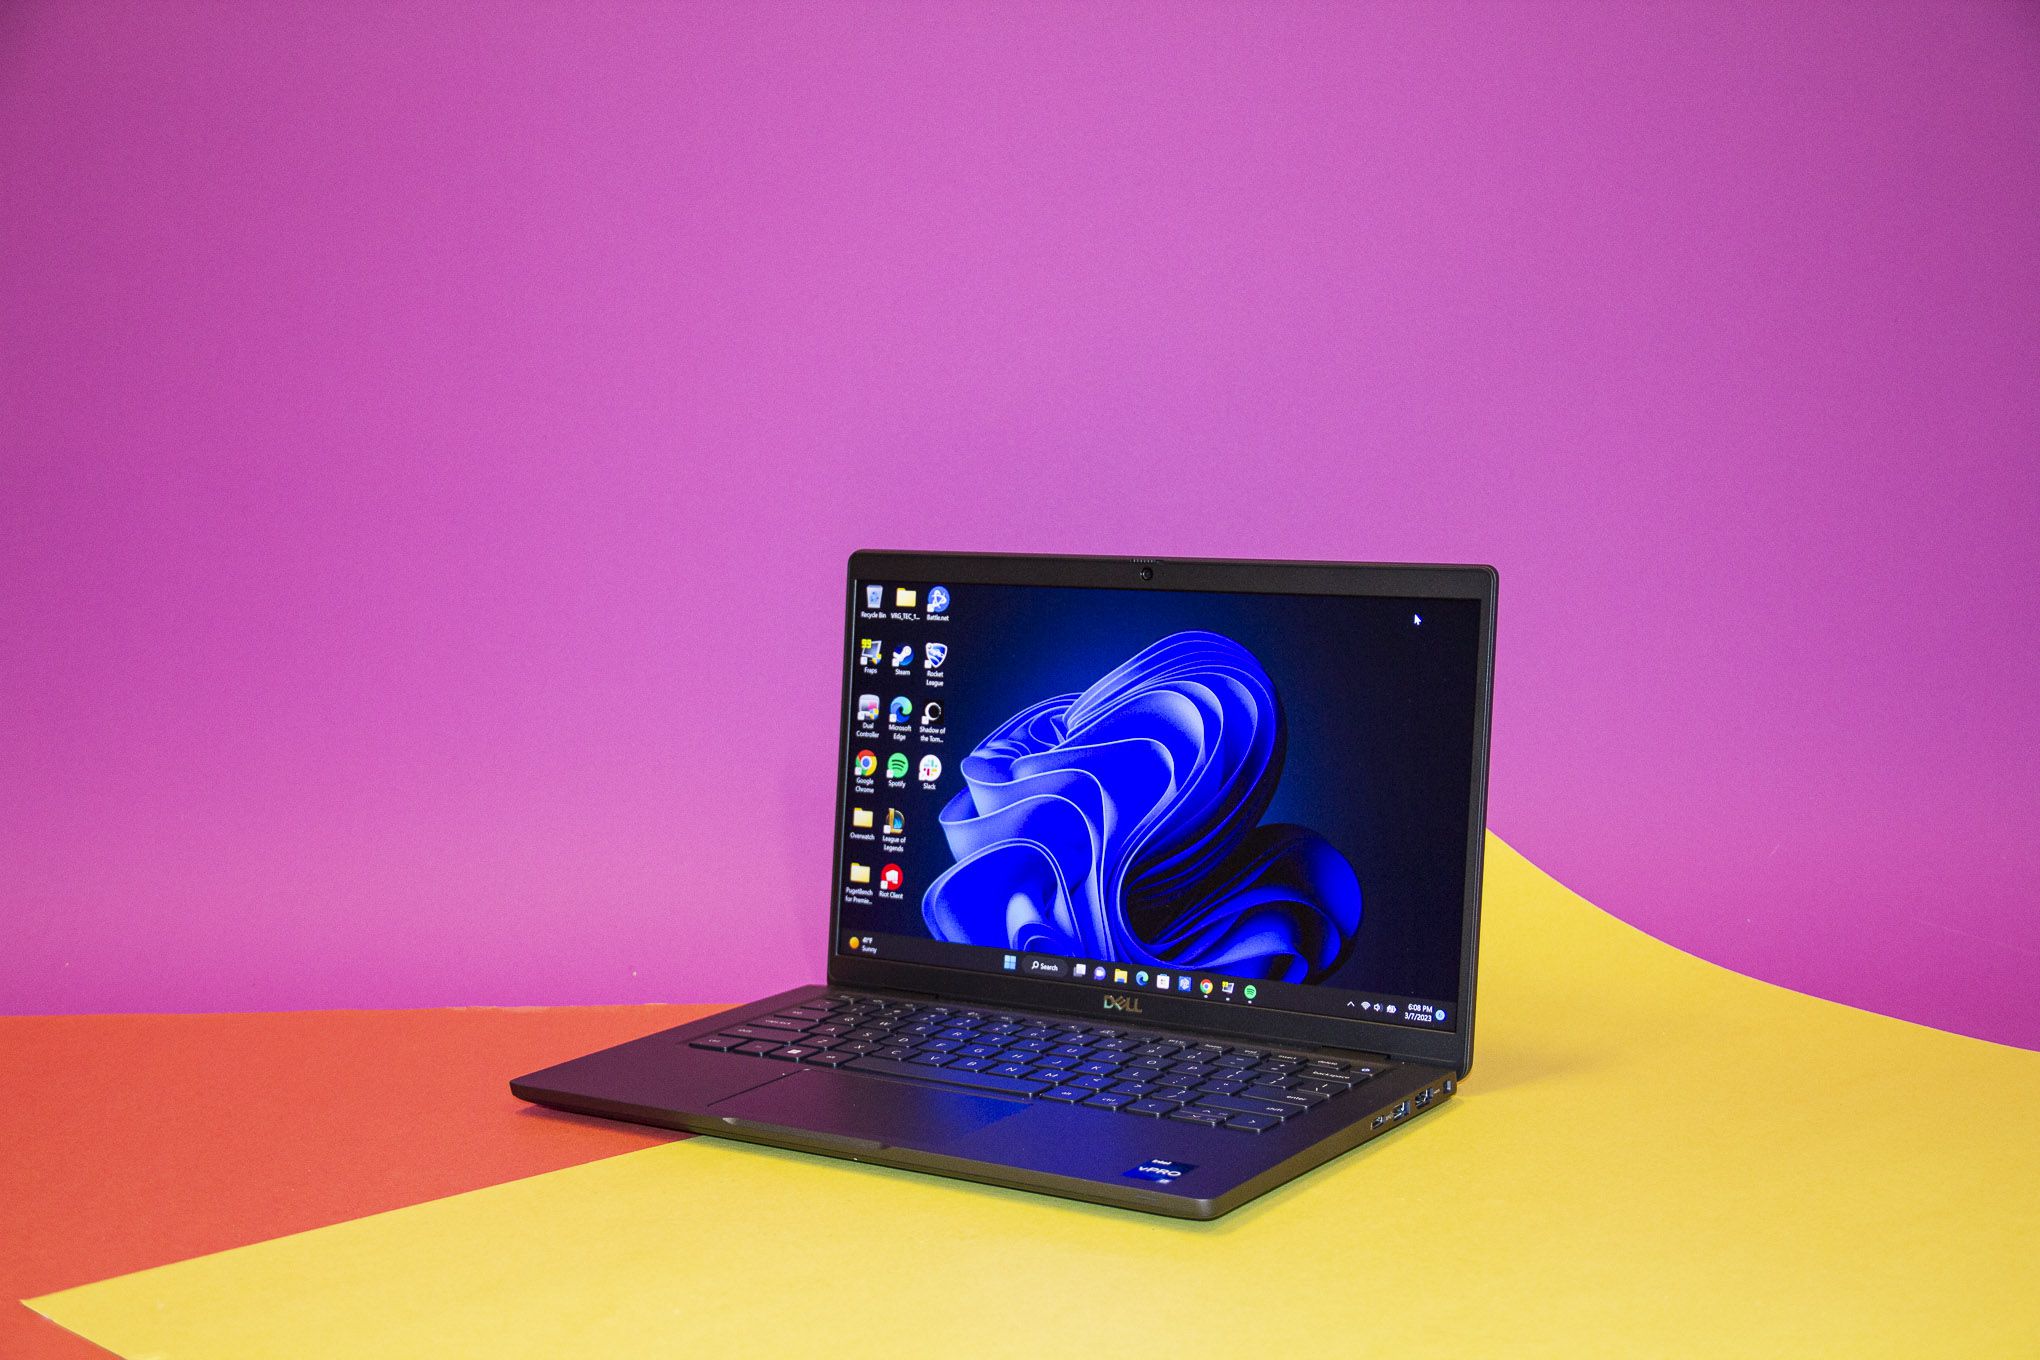 The Dell Latitude 9440 is one of the smallest business laptops - The Verge